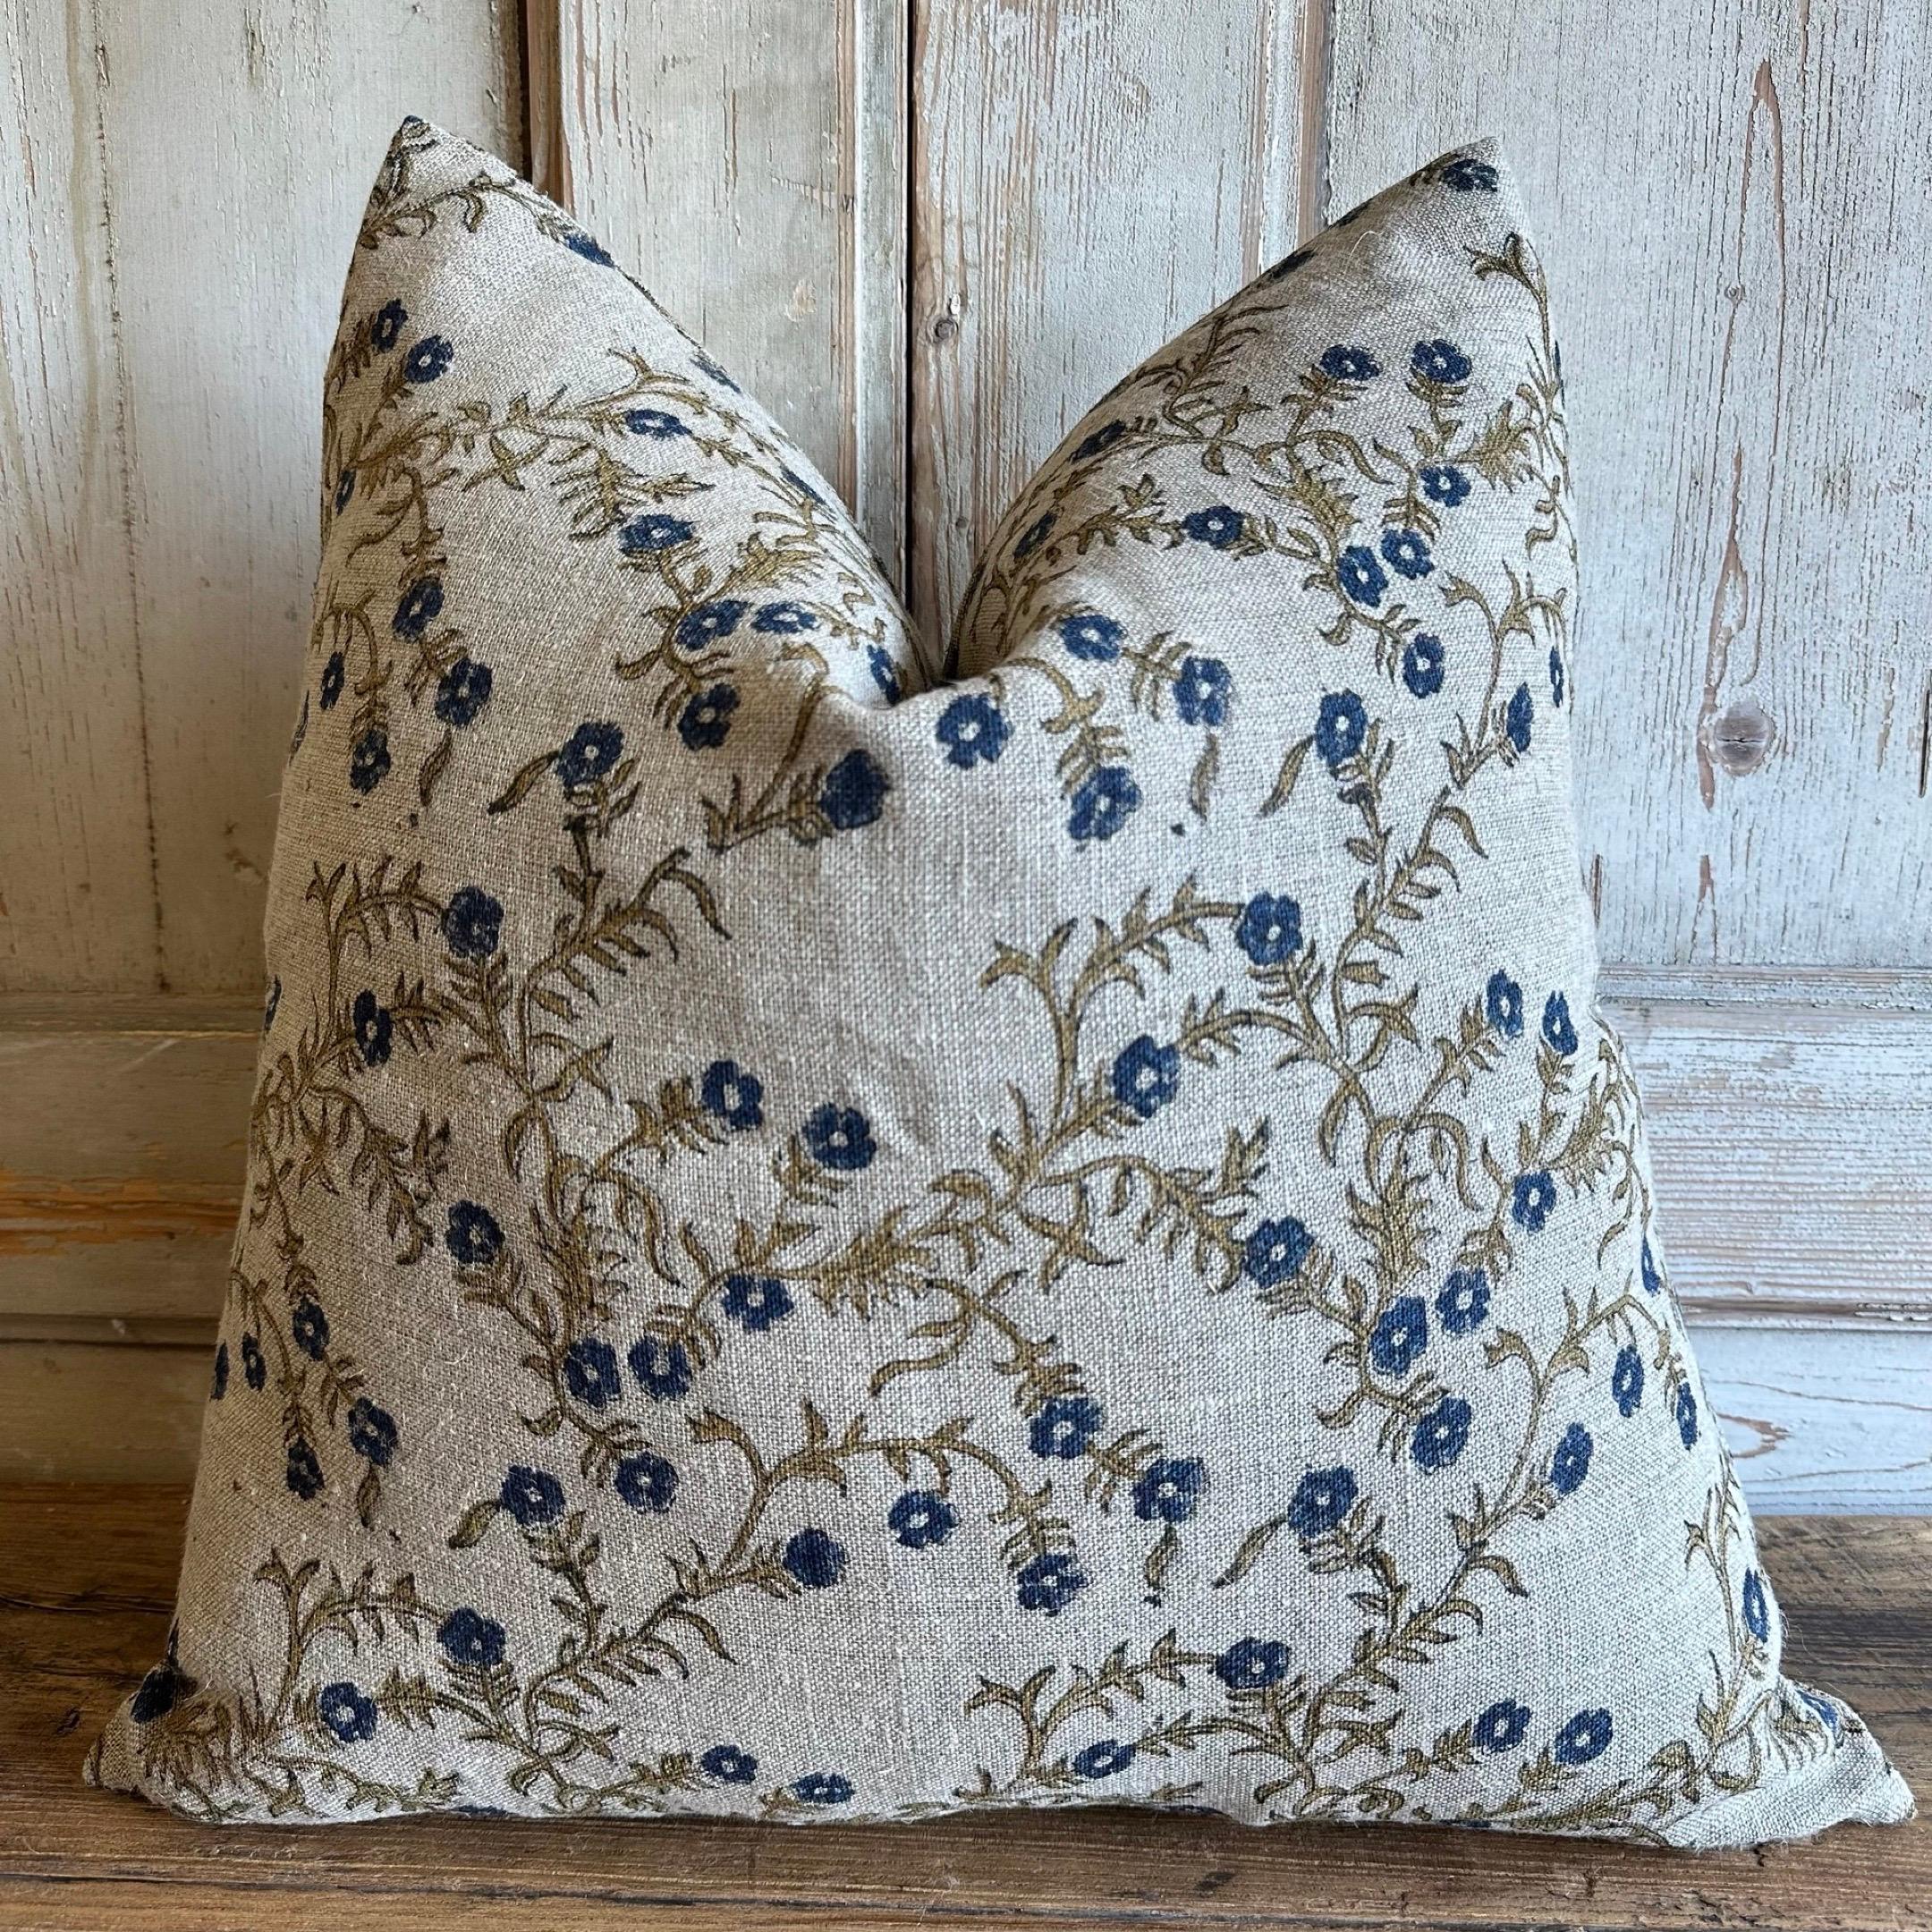 Beautifully hand block-printed pillow on linen fabric. Zipper closure. Double-sided print/reversible. Care Instructions: Dry clean recommended
Size: 20” x 20”
Colors: Flax linen, blue, dark chartreuse.
includes insert. 